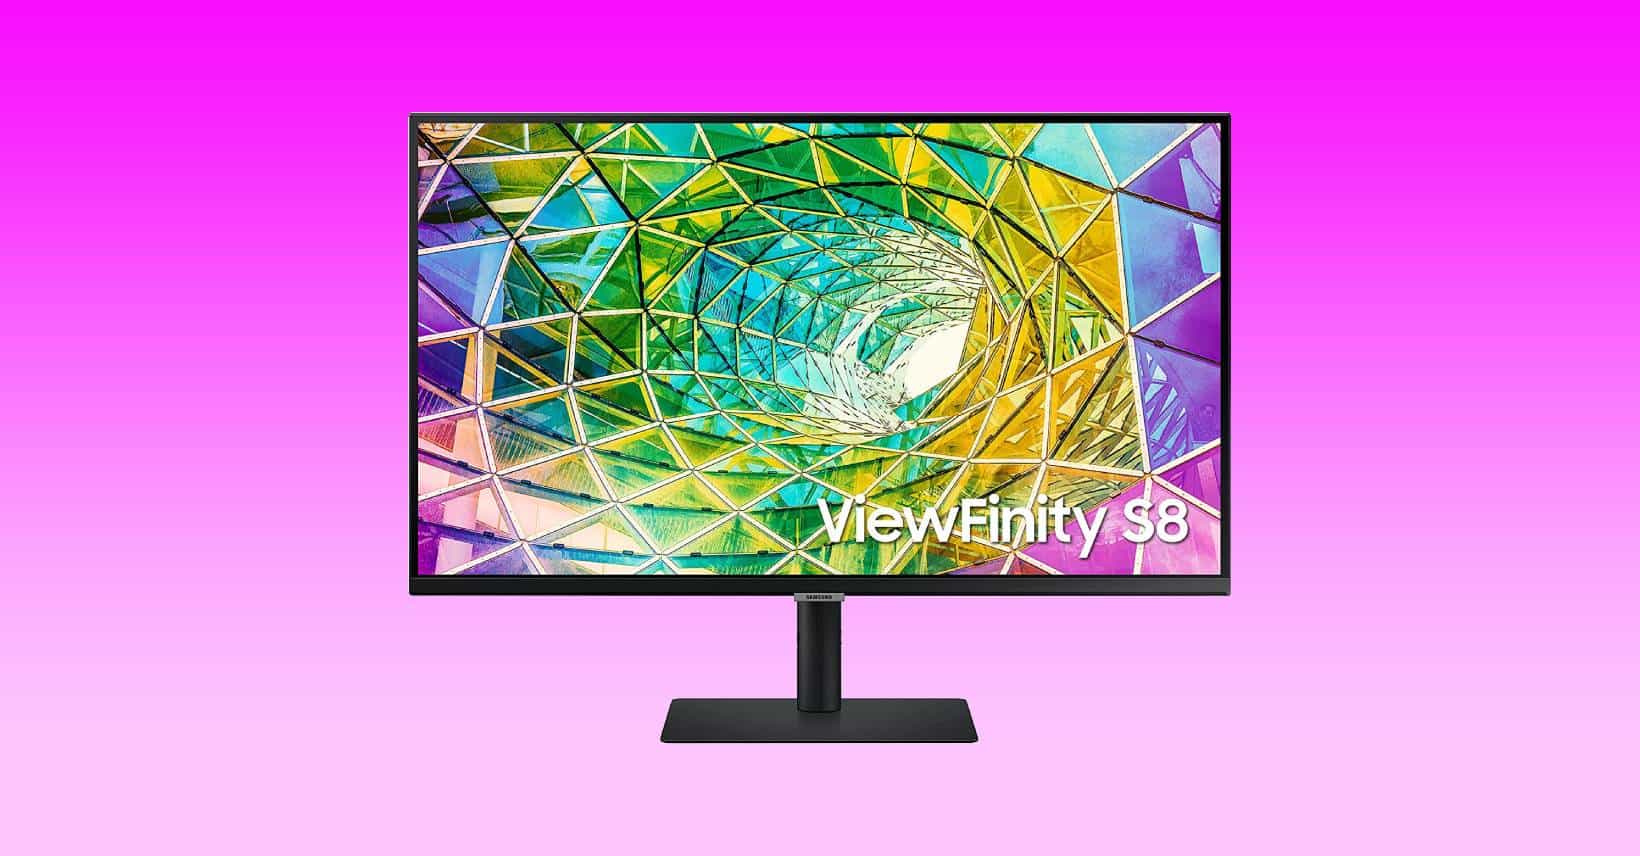 Save $84 on this Samsung 32 inch 4K Monitor – Prime Day deal